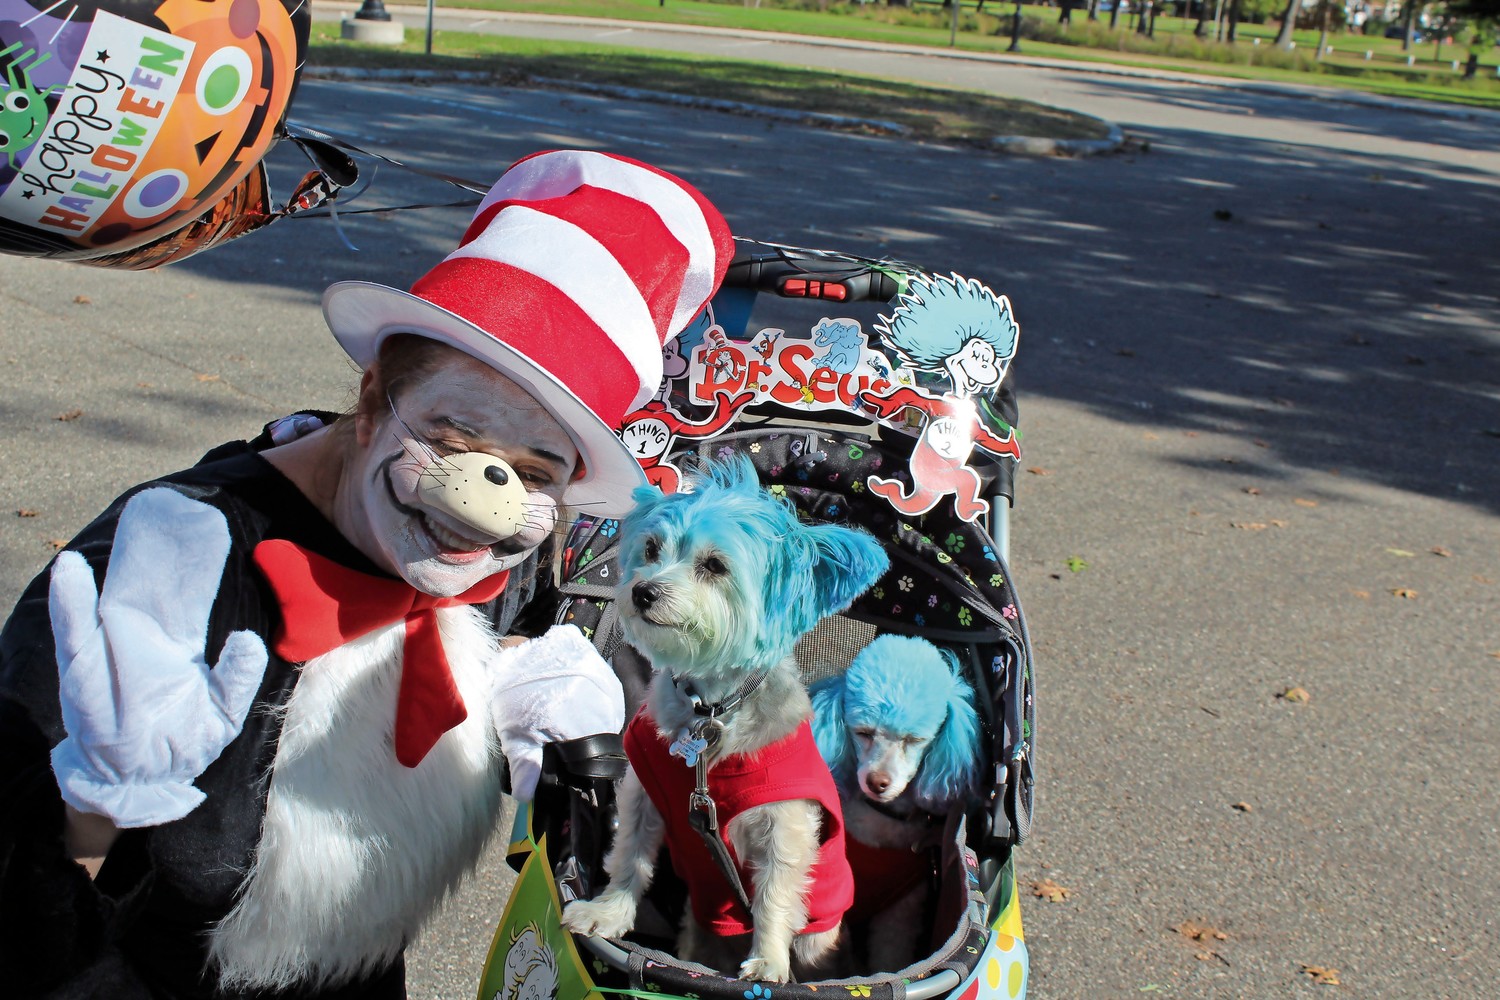 Linda Troy, of Valley Stream, won first-place in the Best Group Costume category for dressing her dogs up as ‘Thing 1’ and ‘Thing 2’ from the Dr. Seuss book “The Cat in the Hat.”